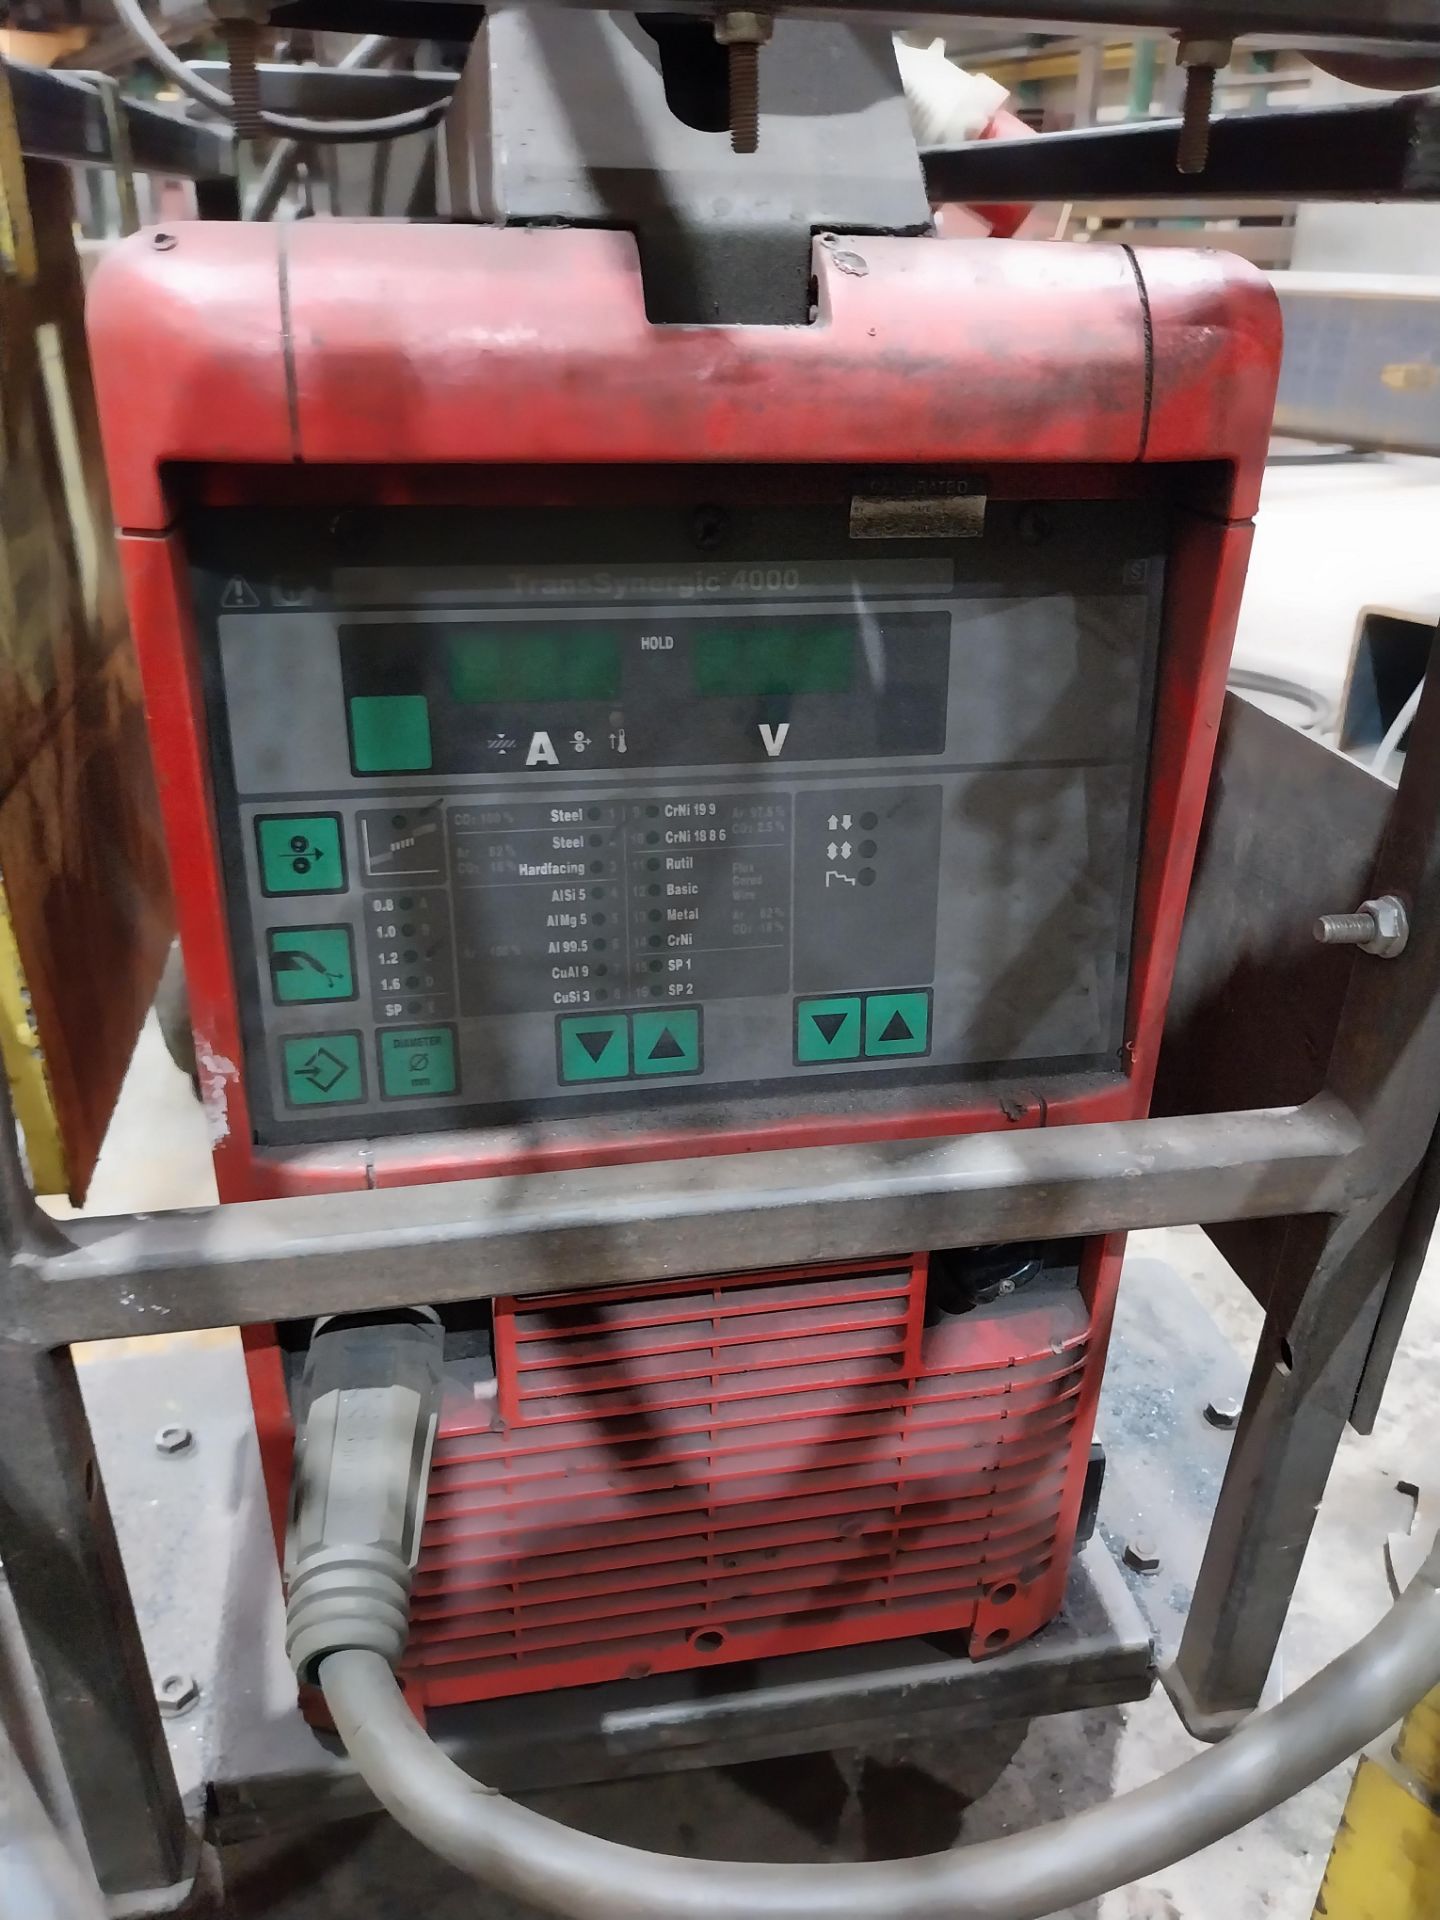 Fronius TransSynergic 4000 mig welder with VR4000 wire feed, clamp and torch (bottle not included) - Image 2 of 6